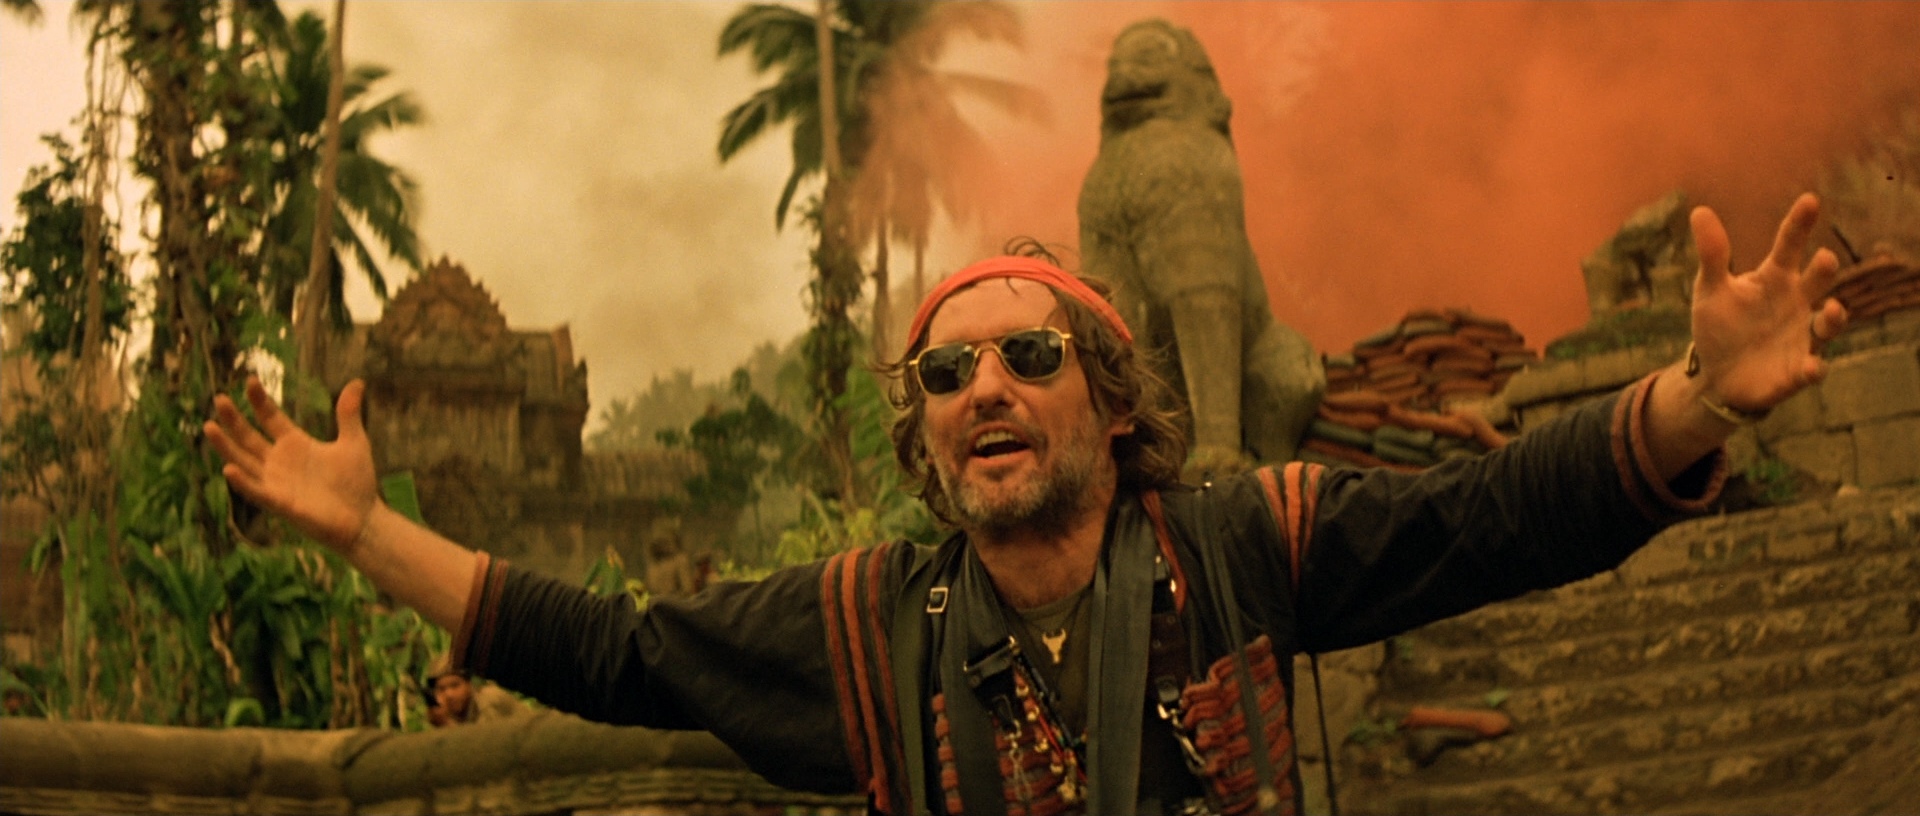 Nice Images Collection: Apocalypse Now Desktop Wallpapers